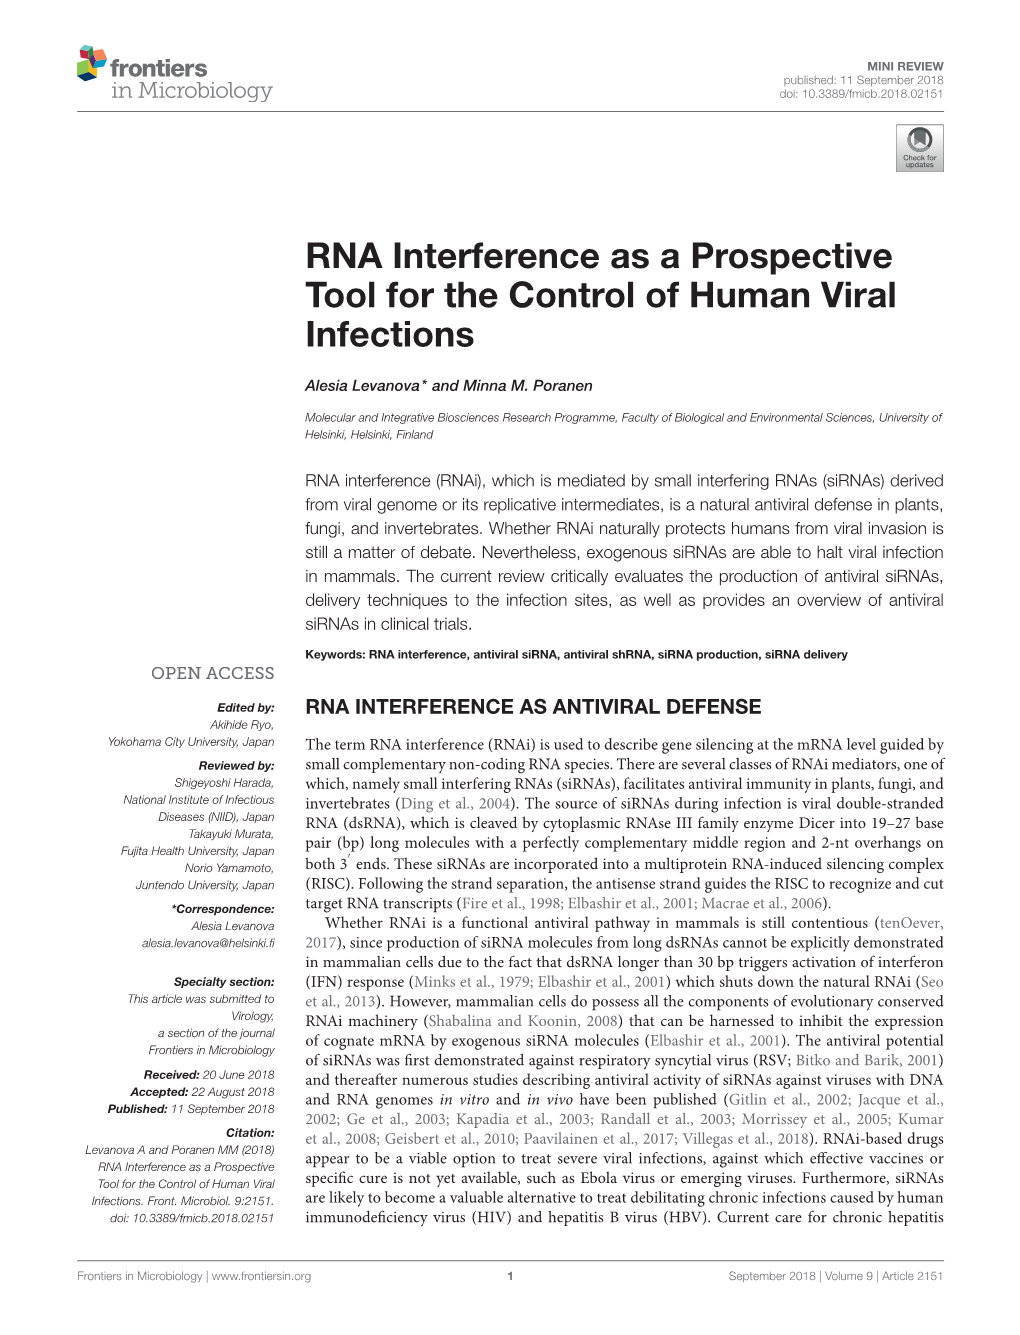 RNA Interference As a Prospective Tool for the Control of Human Viral Infections